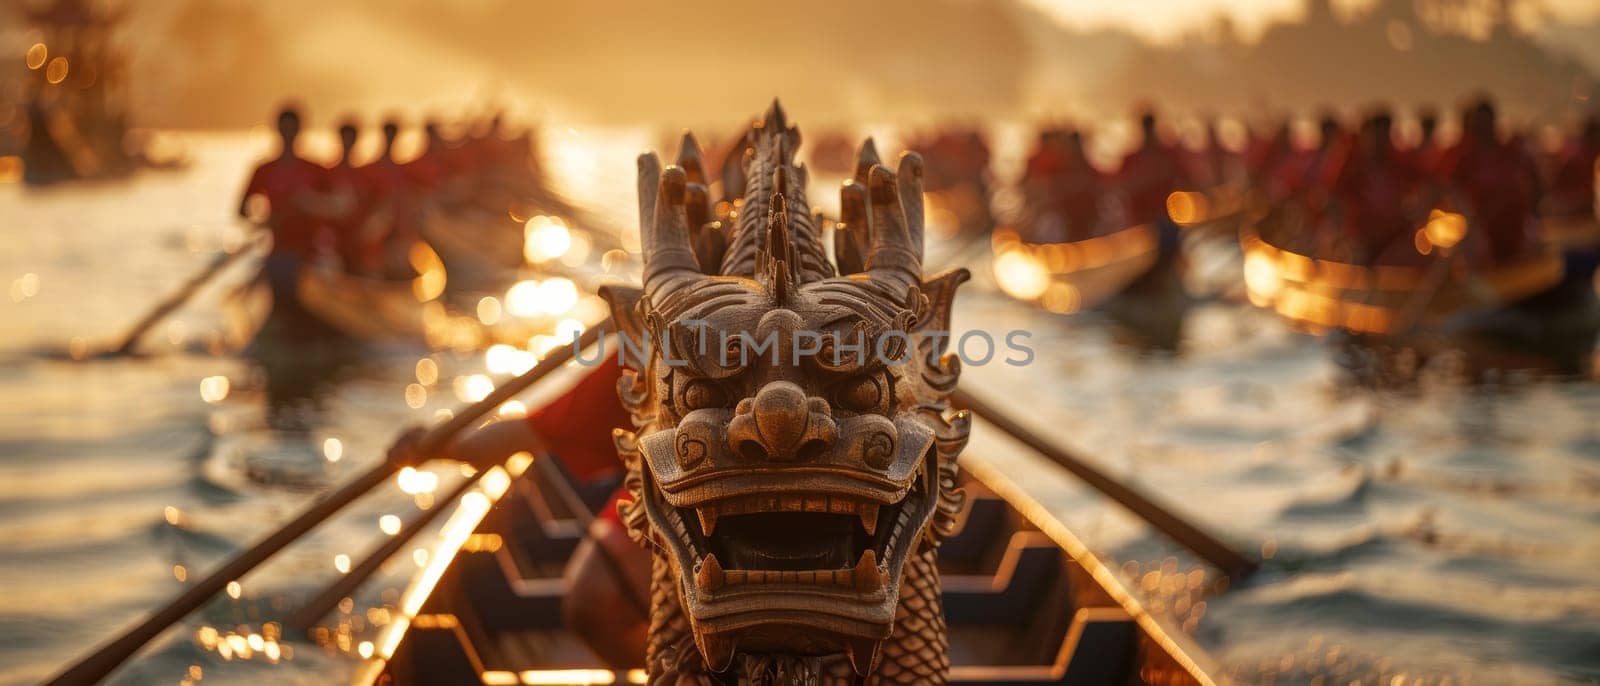 Colorful dragon boats queue on serene waters, their vibrant designs reflecting the festivity of the boat festival